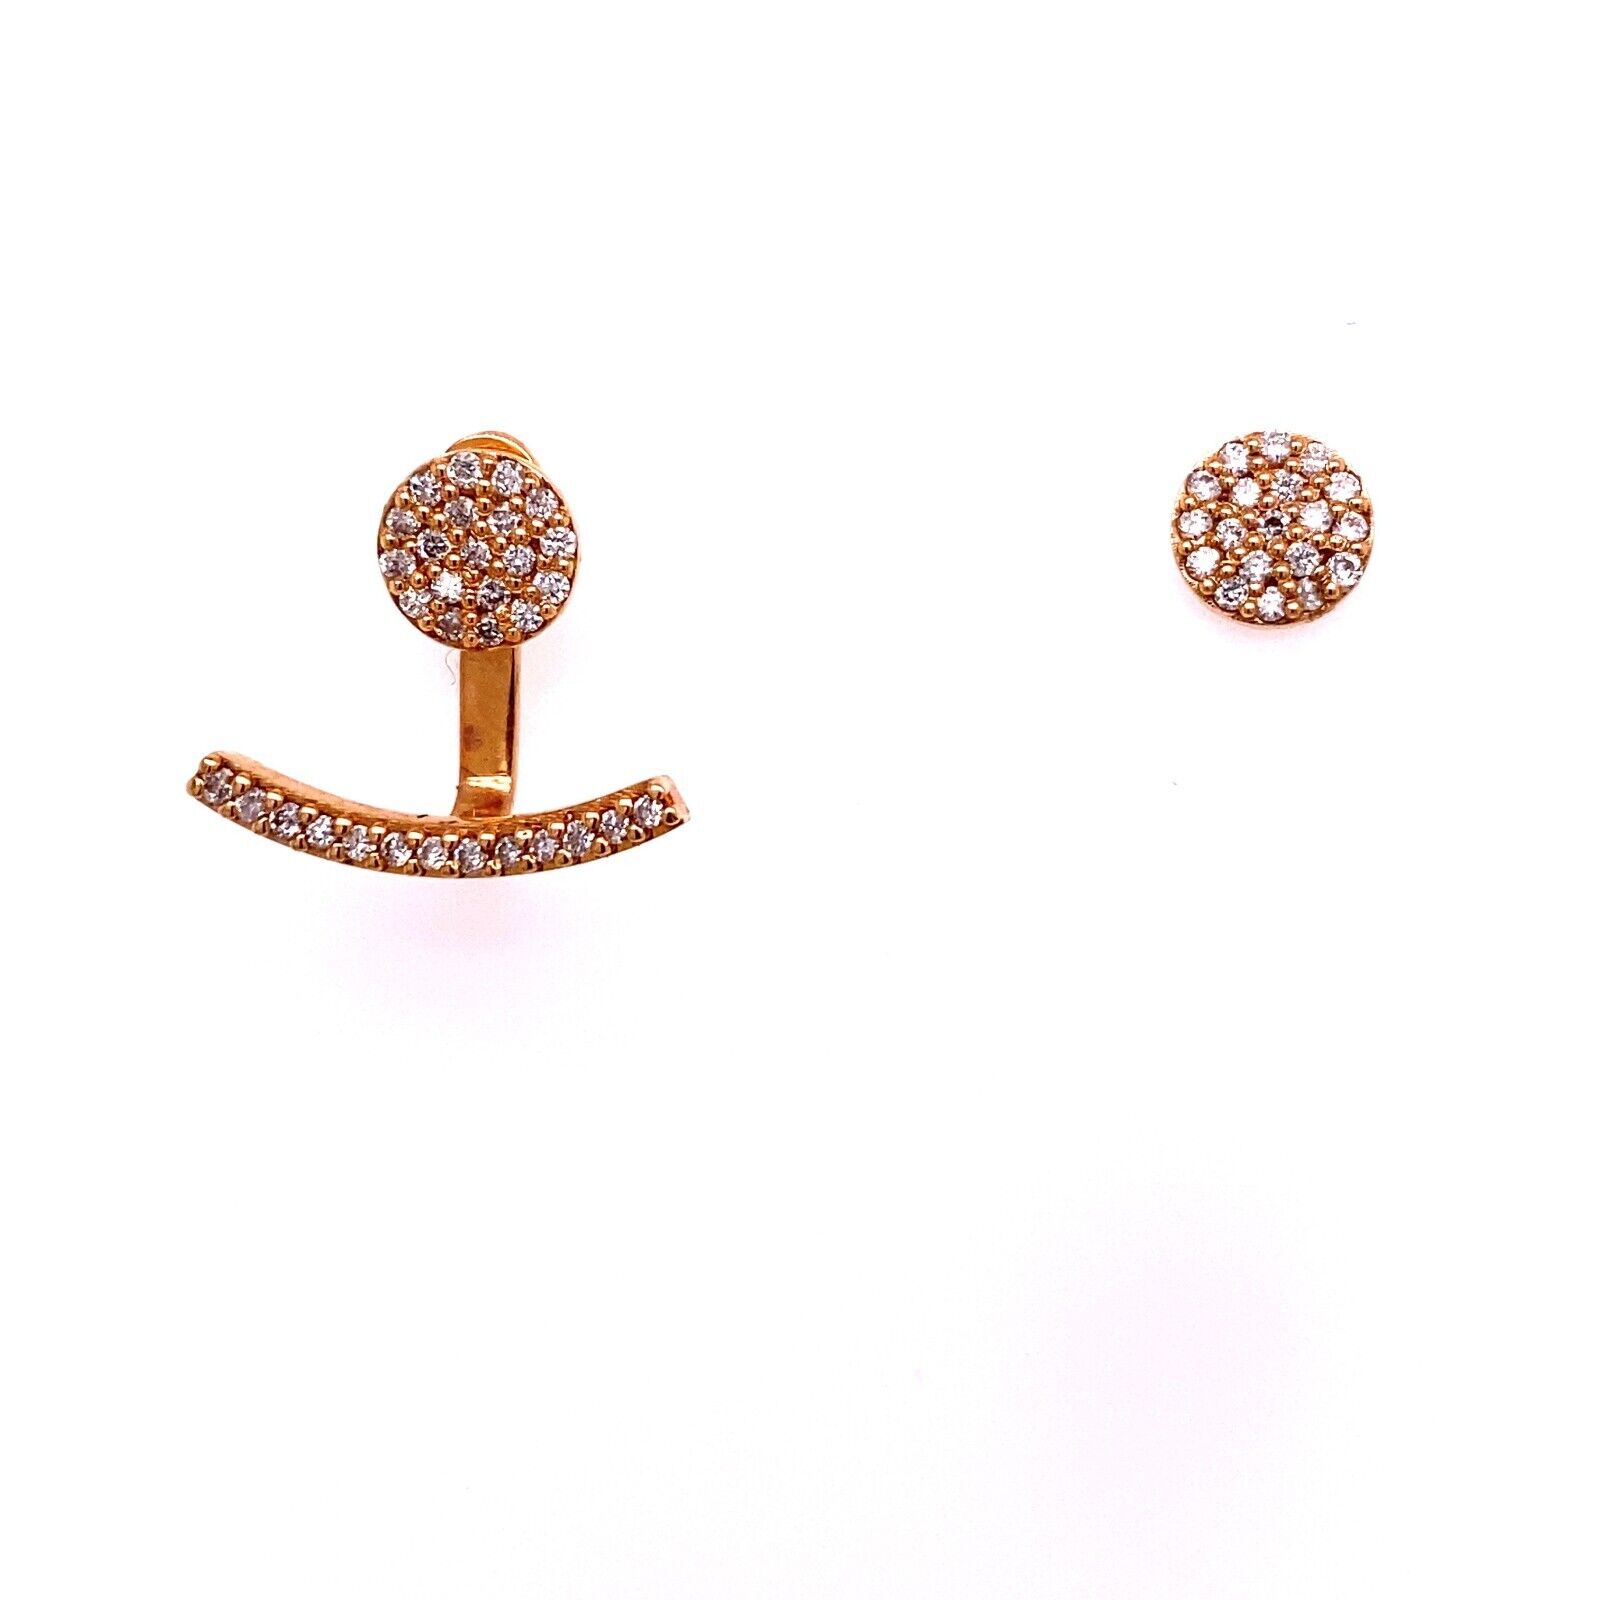 New Fine Quality Drops & Studs Earrings Set with Diamonds in 18ct Rose Gold

This is a pair of 18ct rose gold drop & studs earrings set with 0.50ct of round brilliant cut diamonds. These earrings design makes them a good choice for everyday